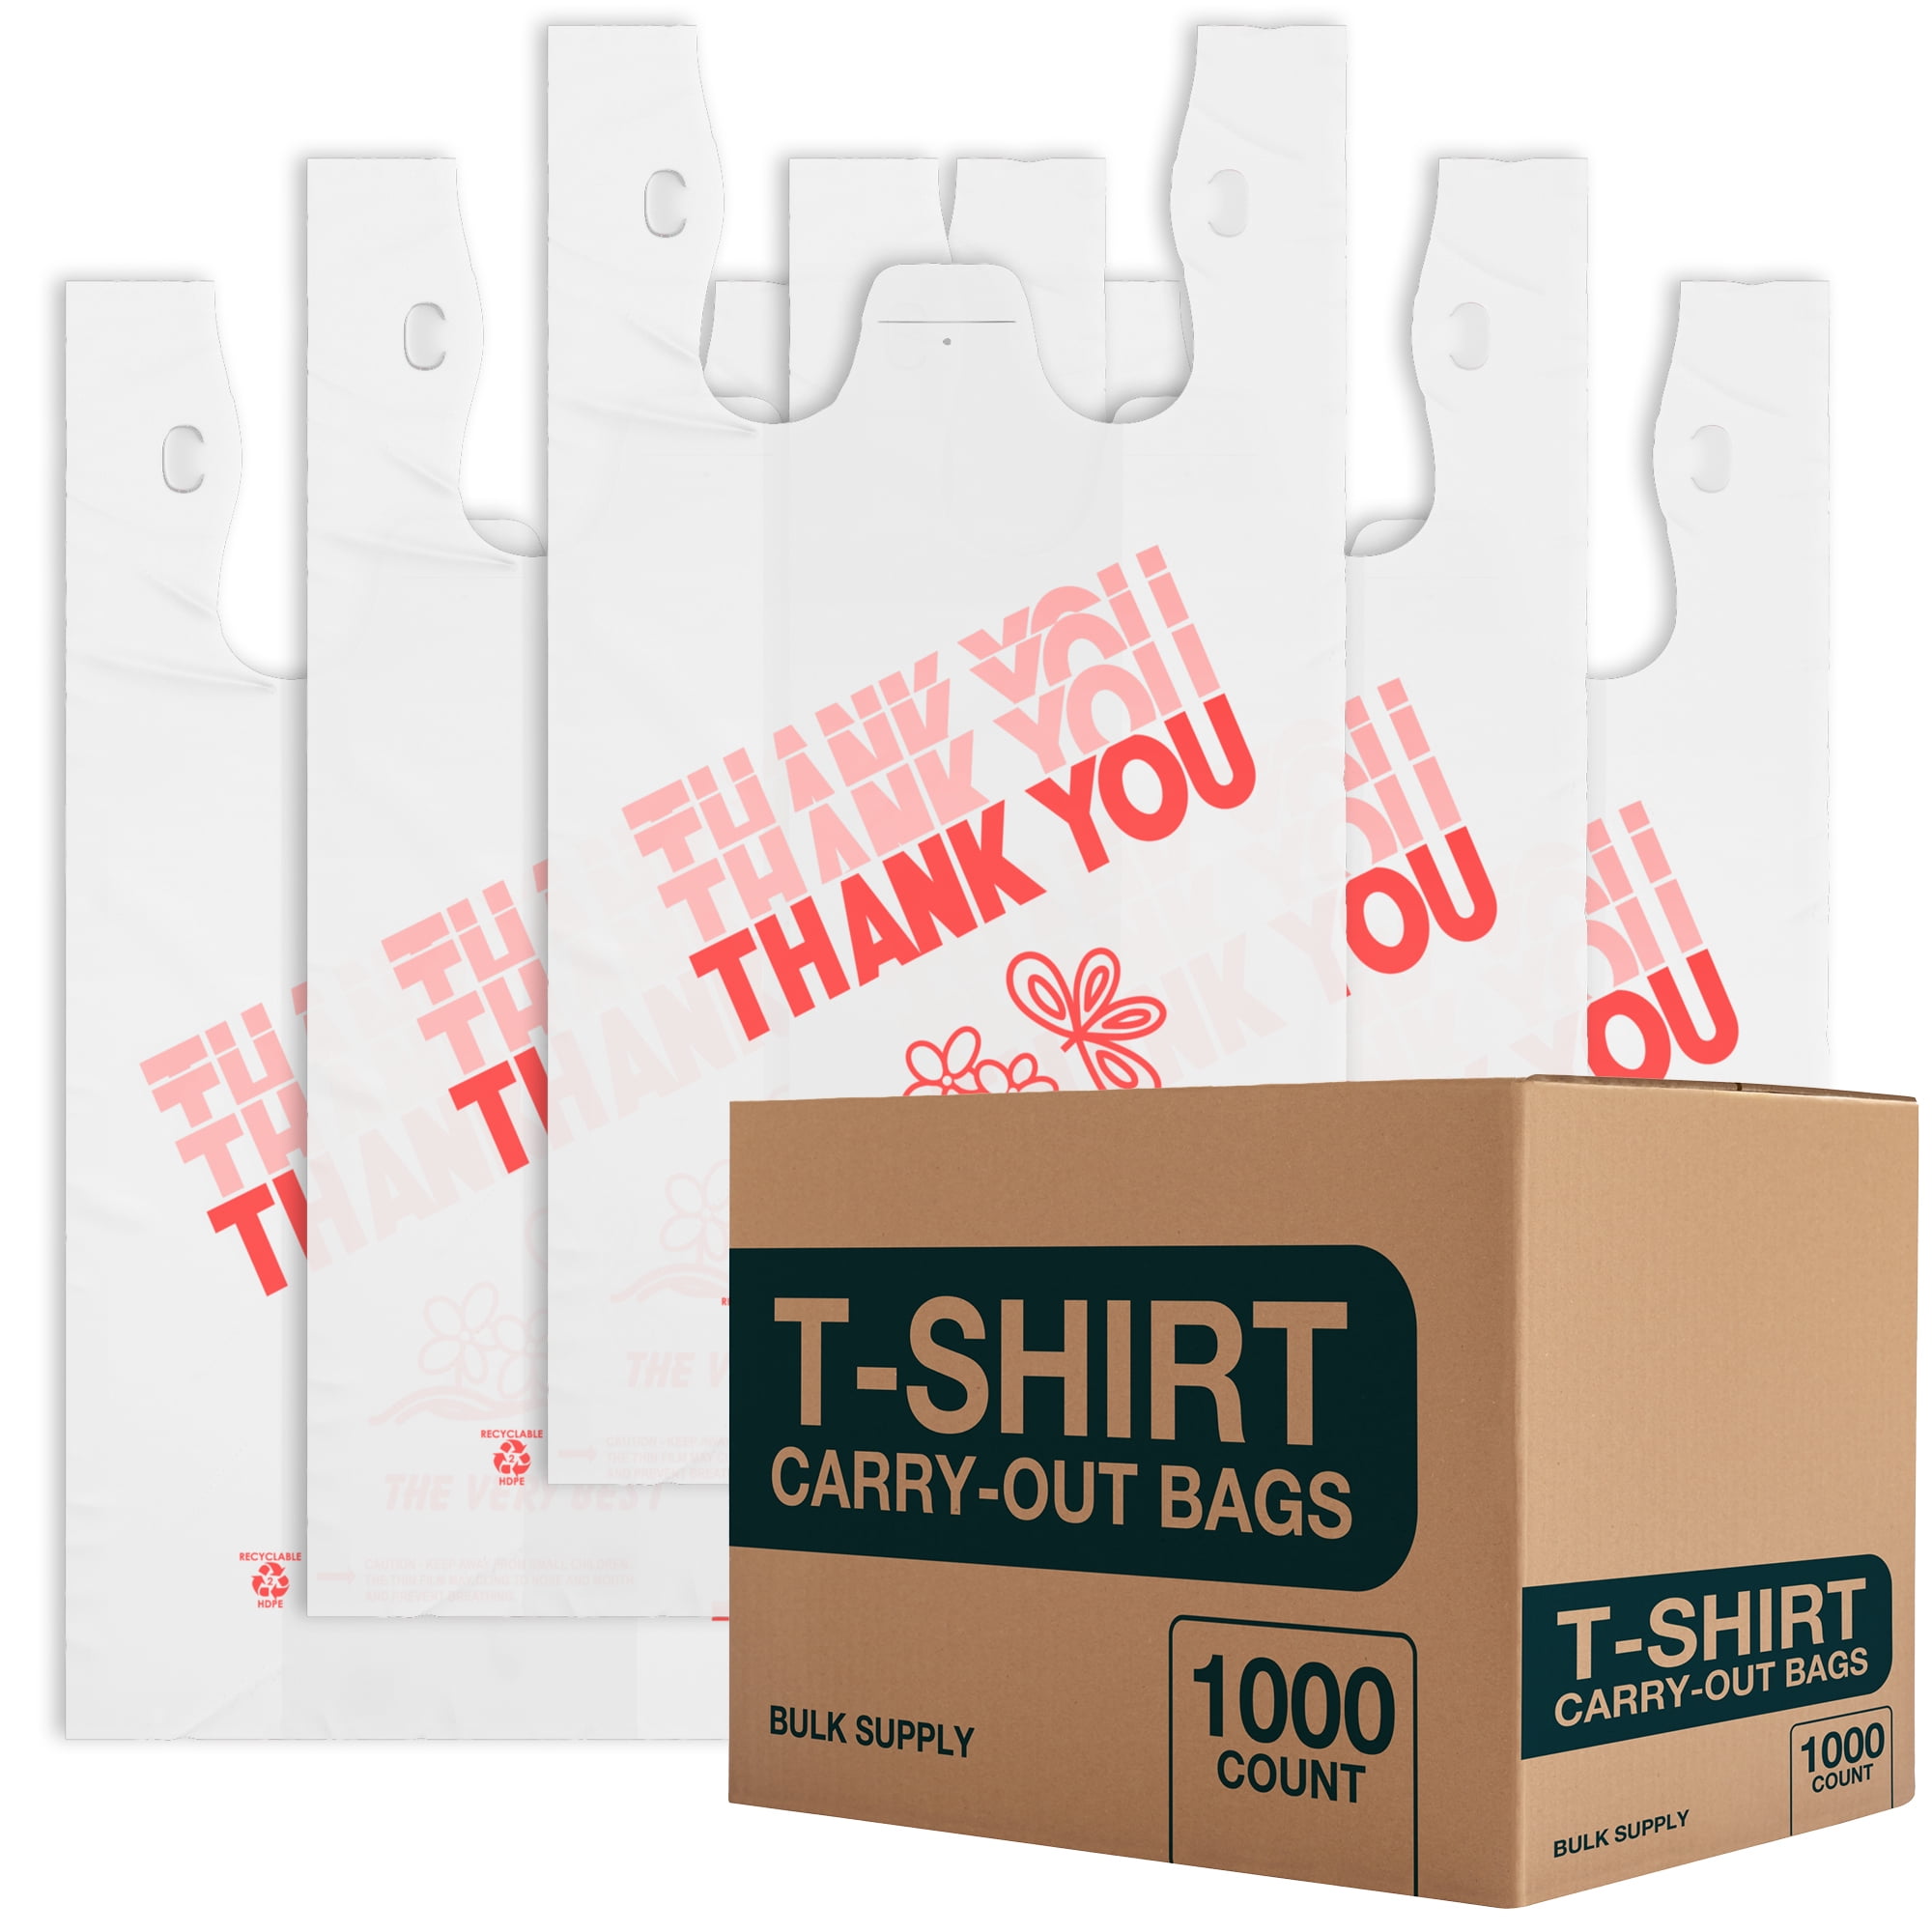  Reli. Plastic Bags Thank You (1000 Count)  White Grocery Bags,  Plastic Shopping Bags with Handles : NOT A BOOK: Industrial & Scientific